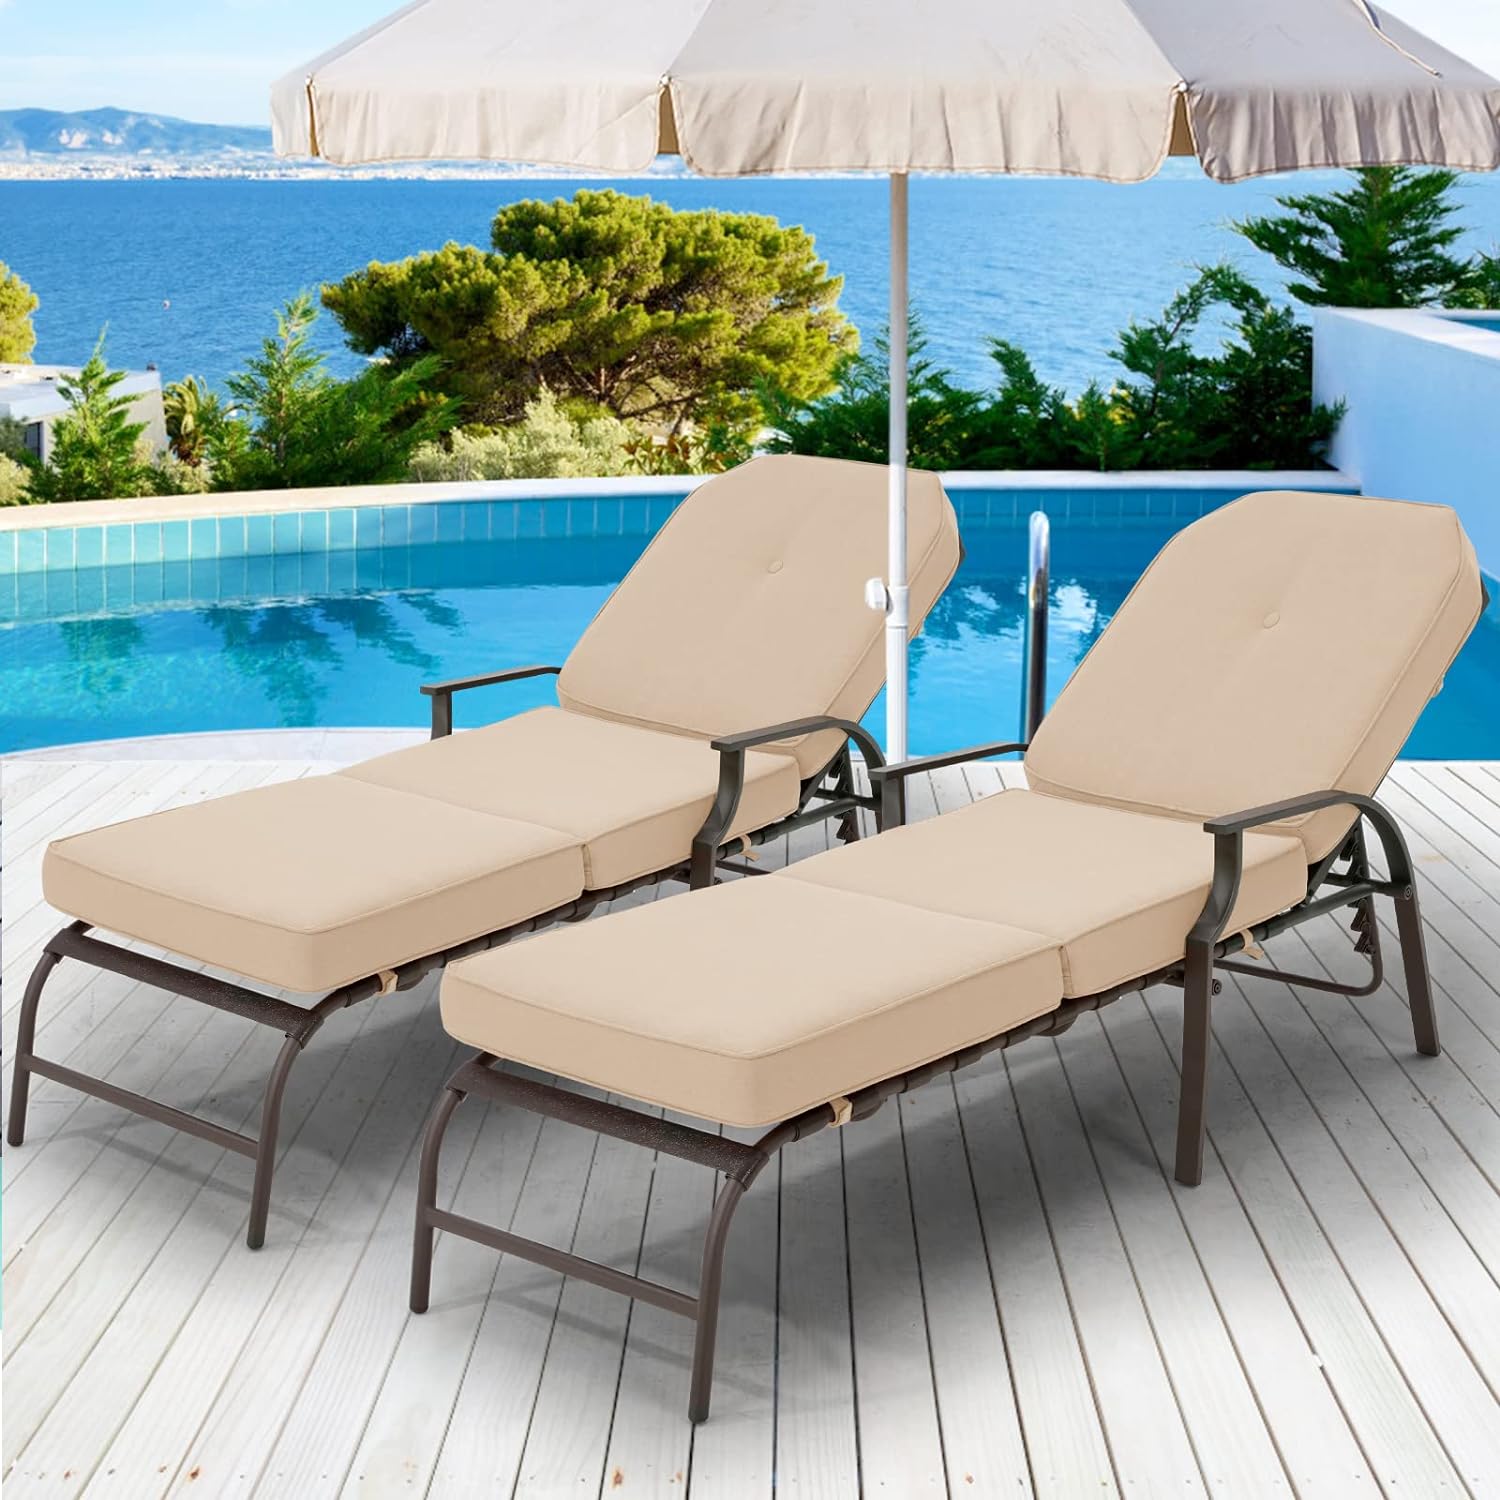 AECOJOY Lounge Chair, Outdoor Chaise Lounge with 5-Position Adjustable Backrest, Pool Chairs for Patio, Porch and Pool, Beige